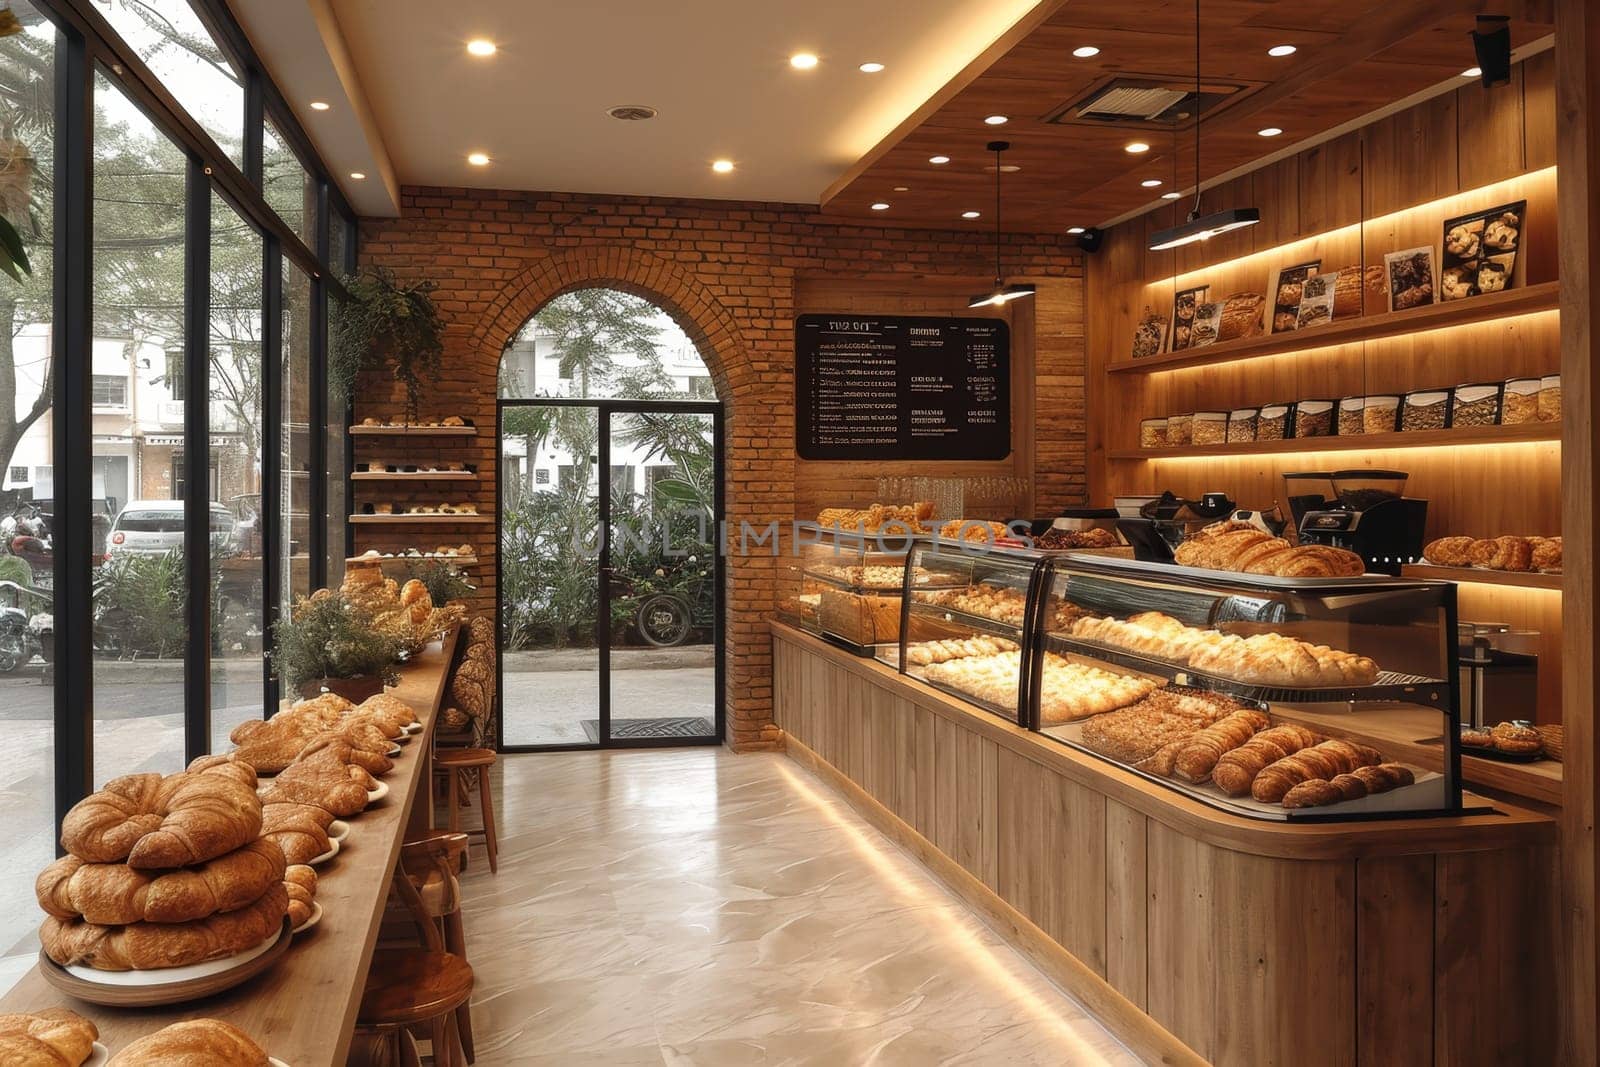 The interior of a bakery and a store. 3d illustration by Lobachad